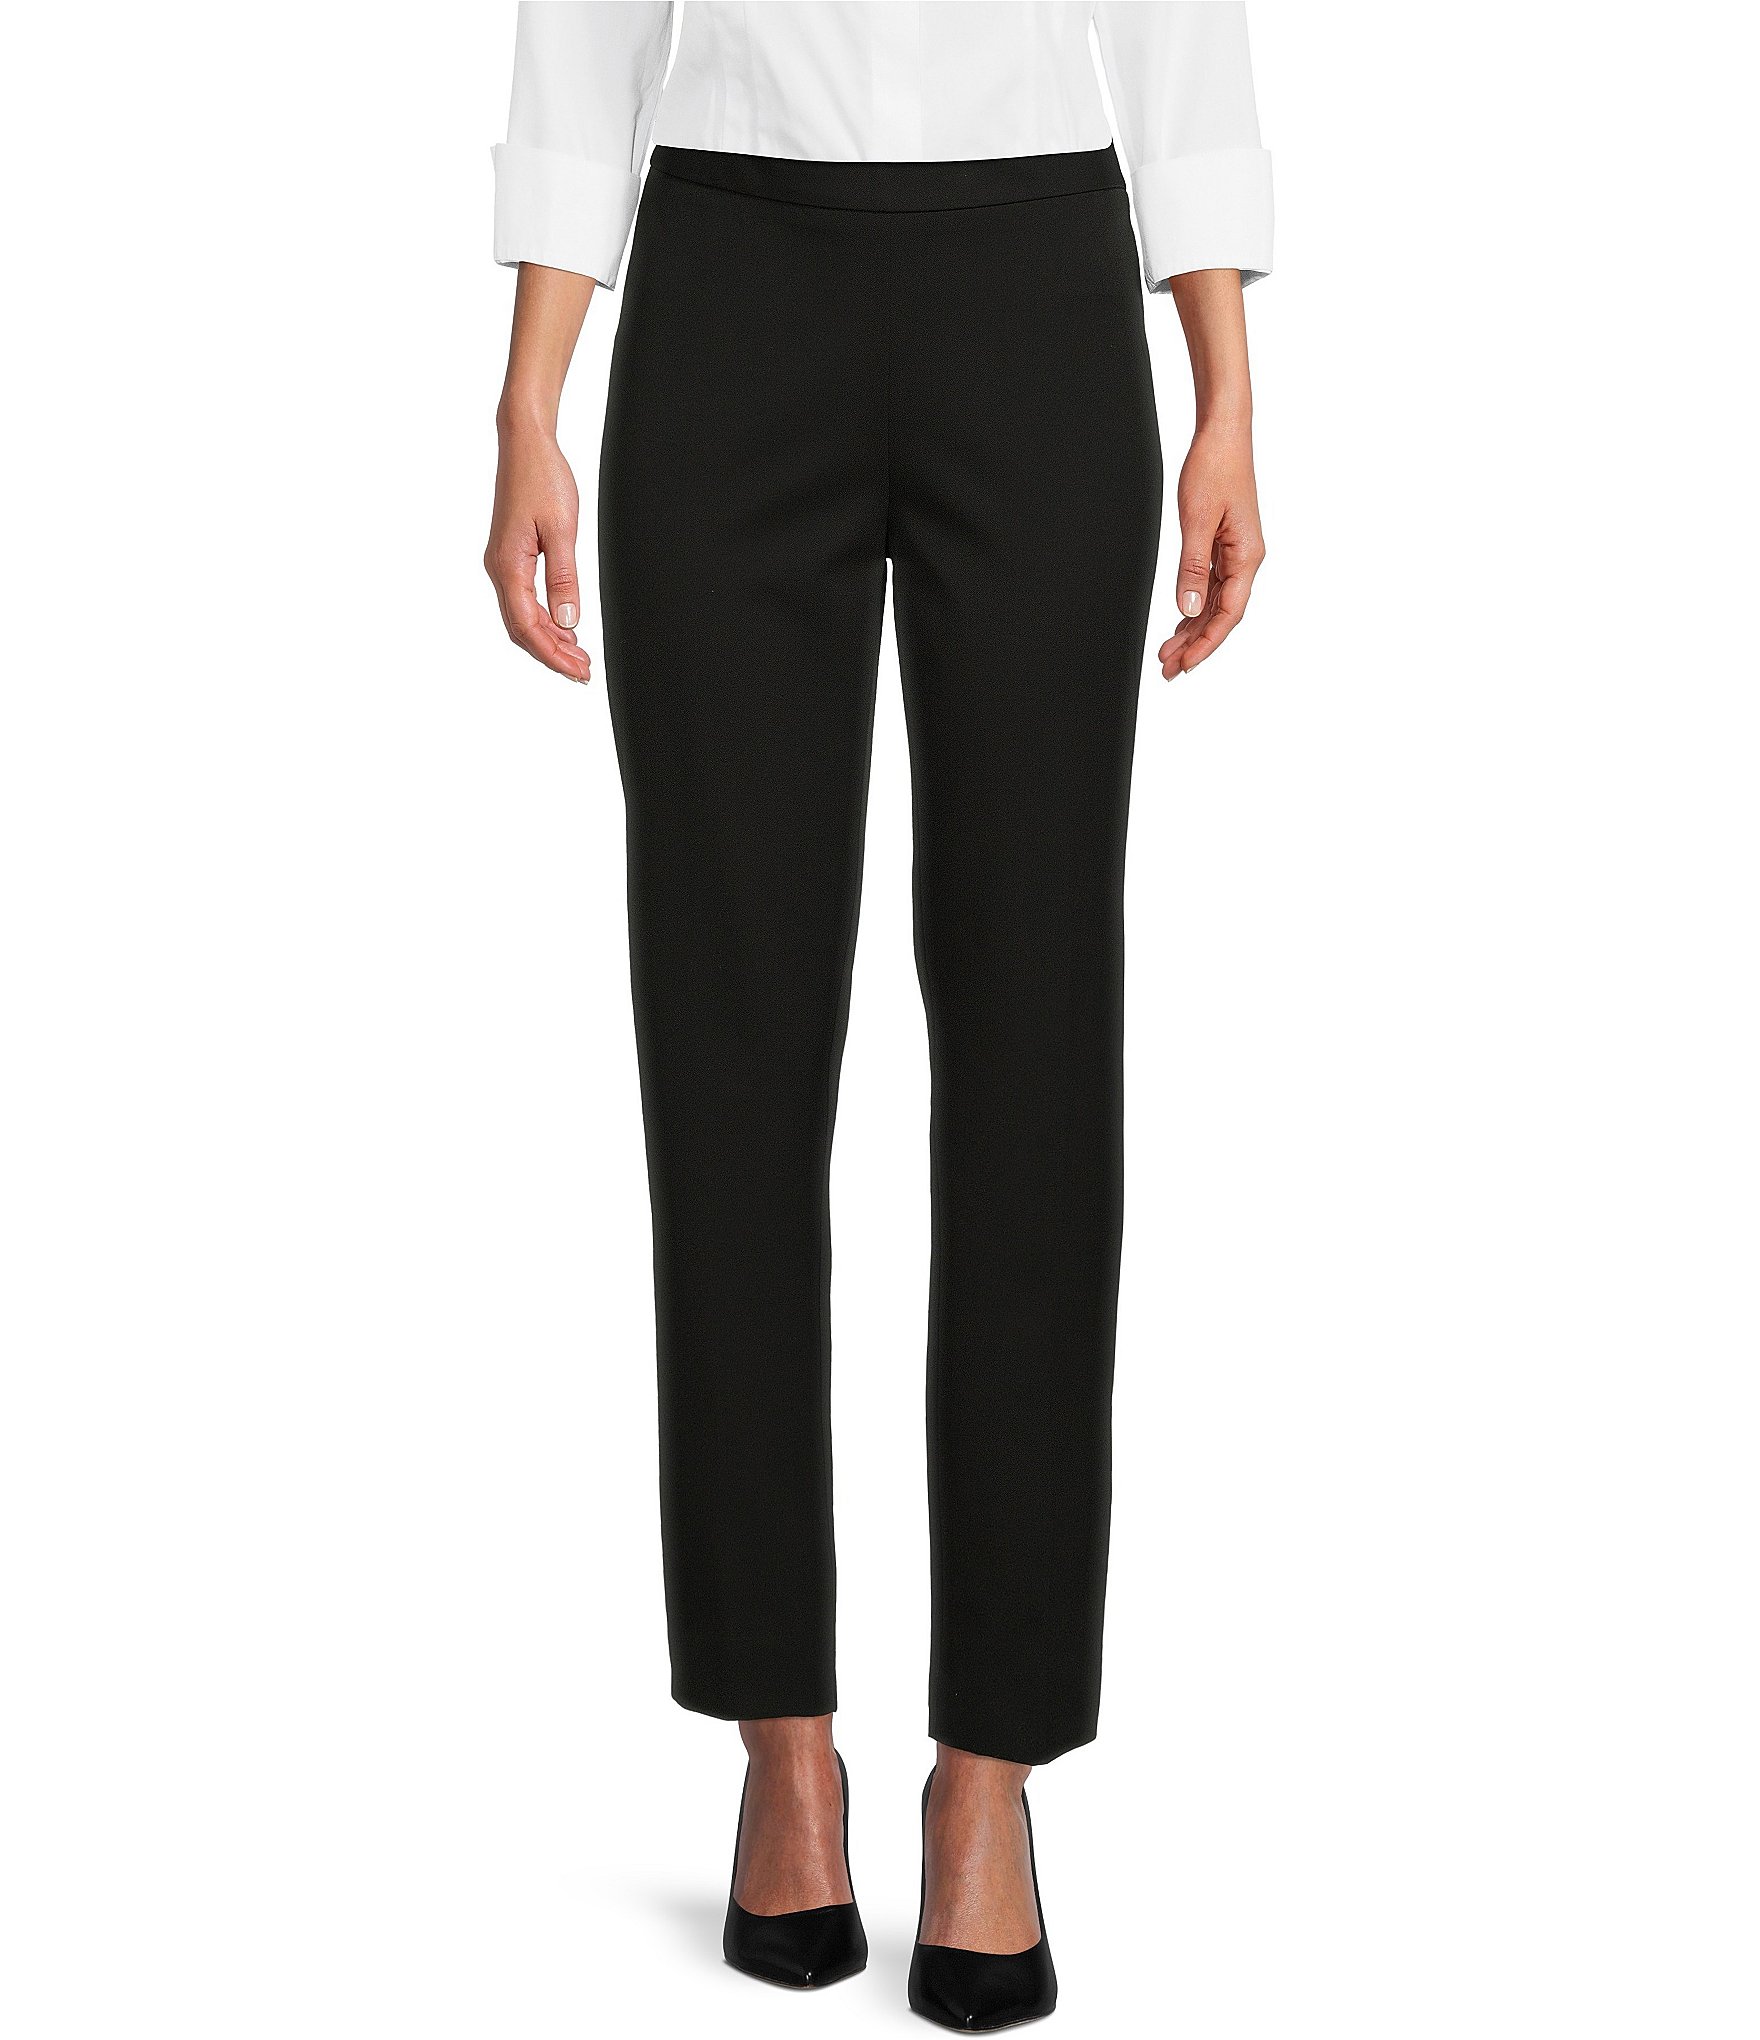 https://dimg.dillards.com/is/image/DillardsZoom/zoom/investments-the-5th-ave-fit-side-zip-slim-leg-pants/00000001_zi_4ca958fd-b0ab-4f0e-a67f-dbc7f8f3b8a3.jpg